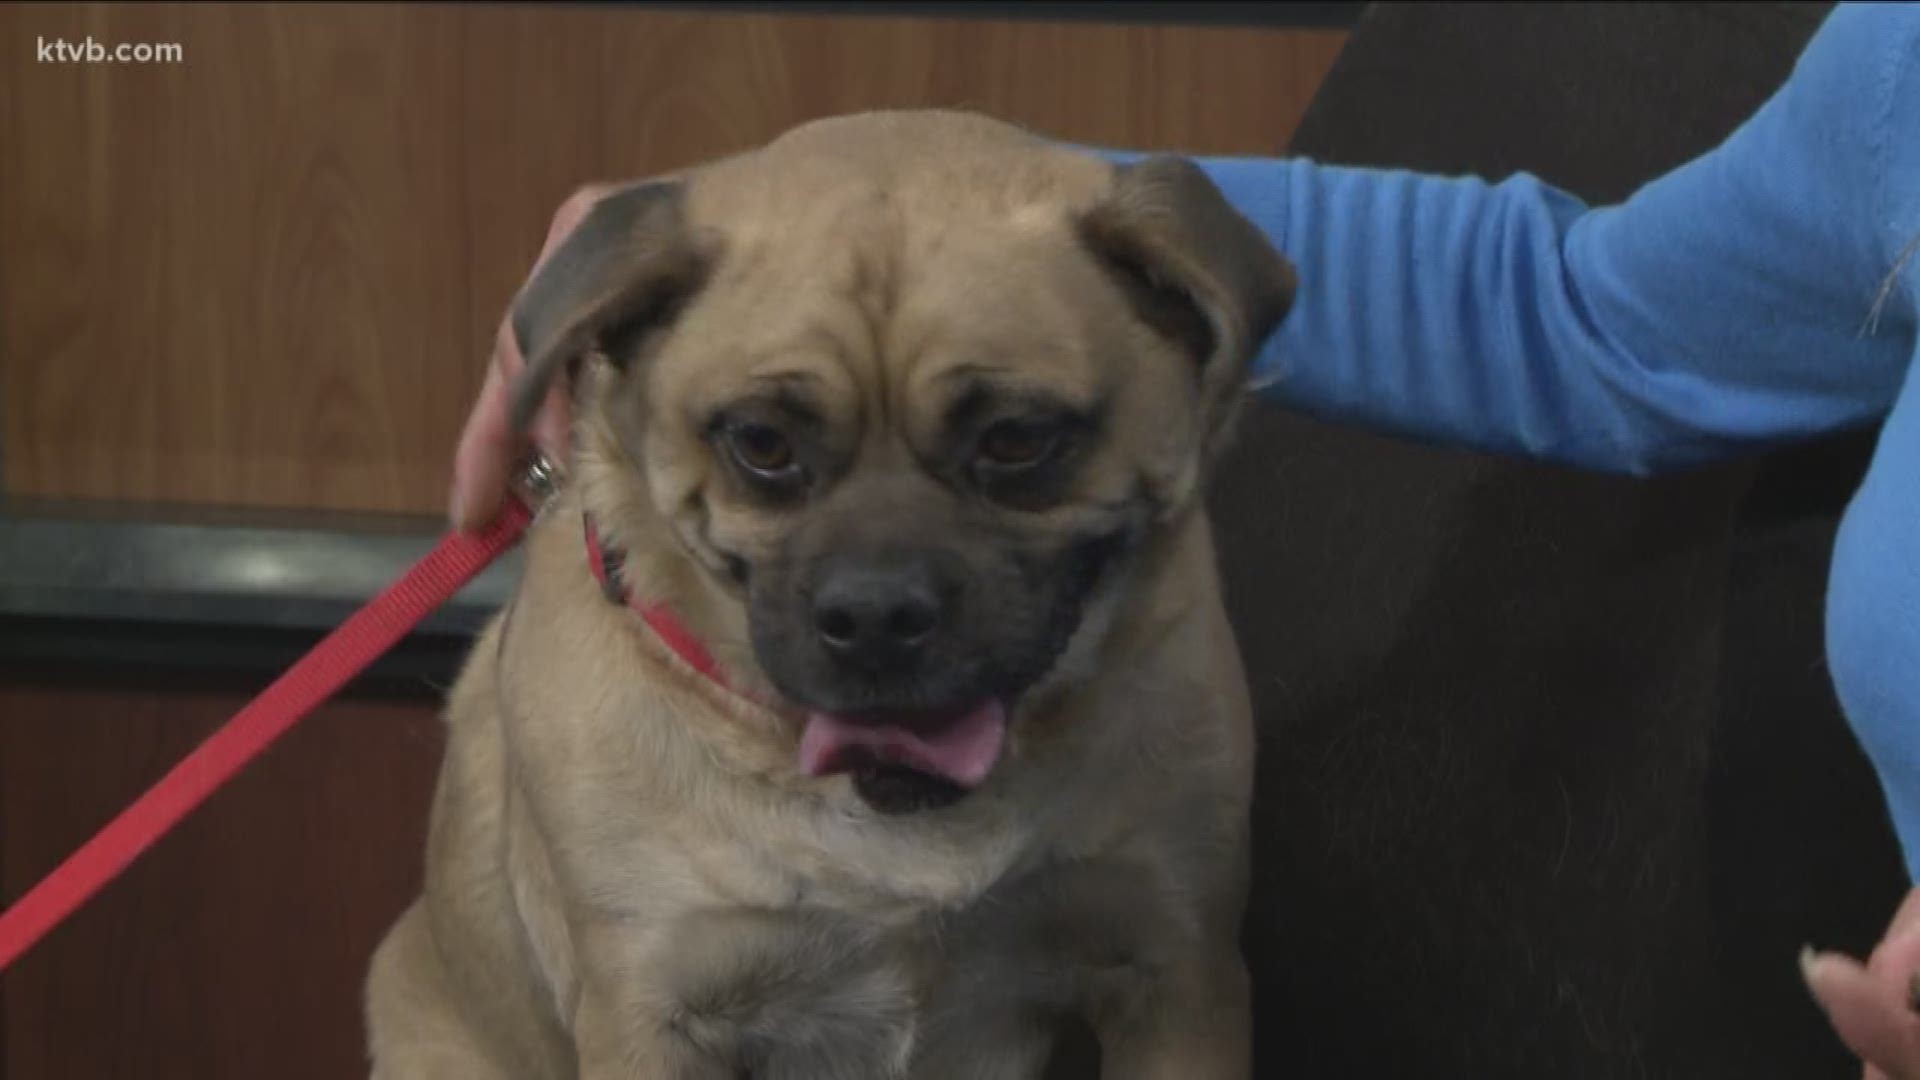 Mikey is available now for adoption from the Idaho Humane Society. He has a sweet personality and is very independent.